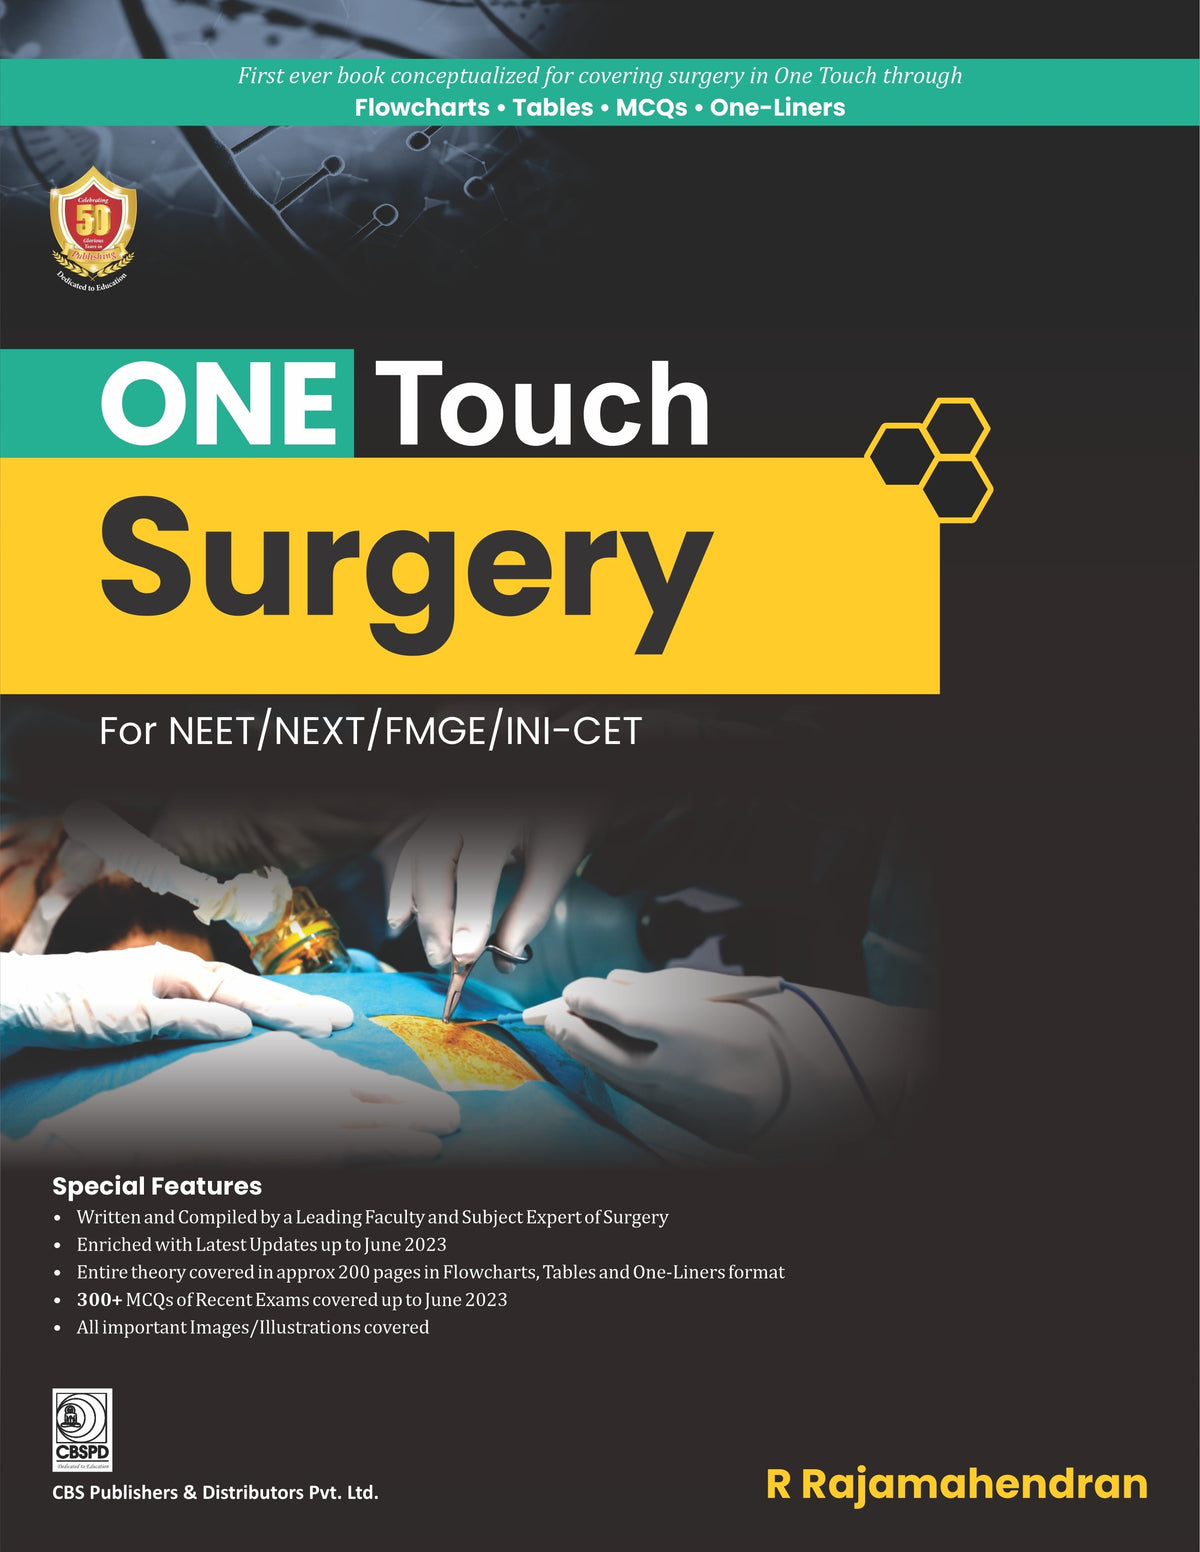 One Touch Surgery for NEET/NEXT/FMGE/IN-CET by Dr R Rajamahendran